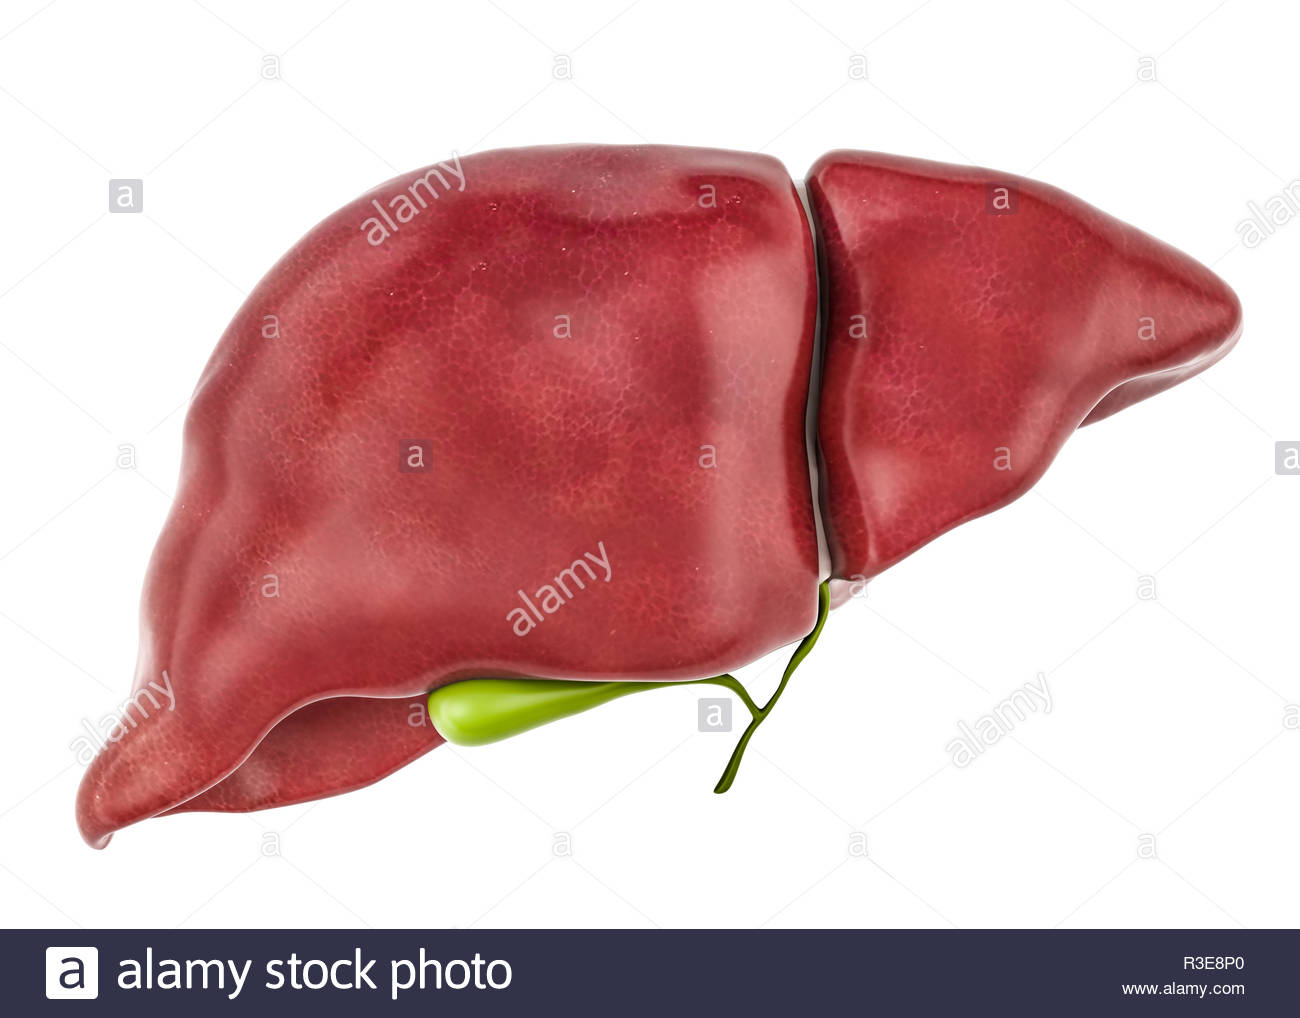 Healthy Human Liver With Gallbladder 3d Rendering Isolated On